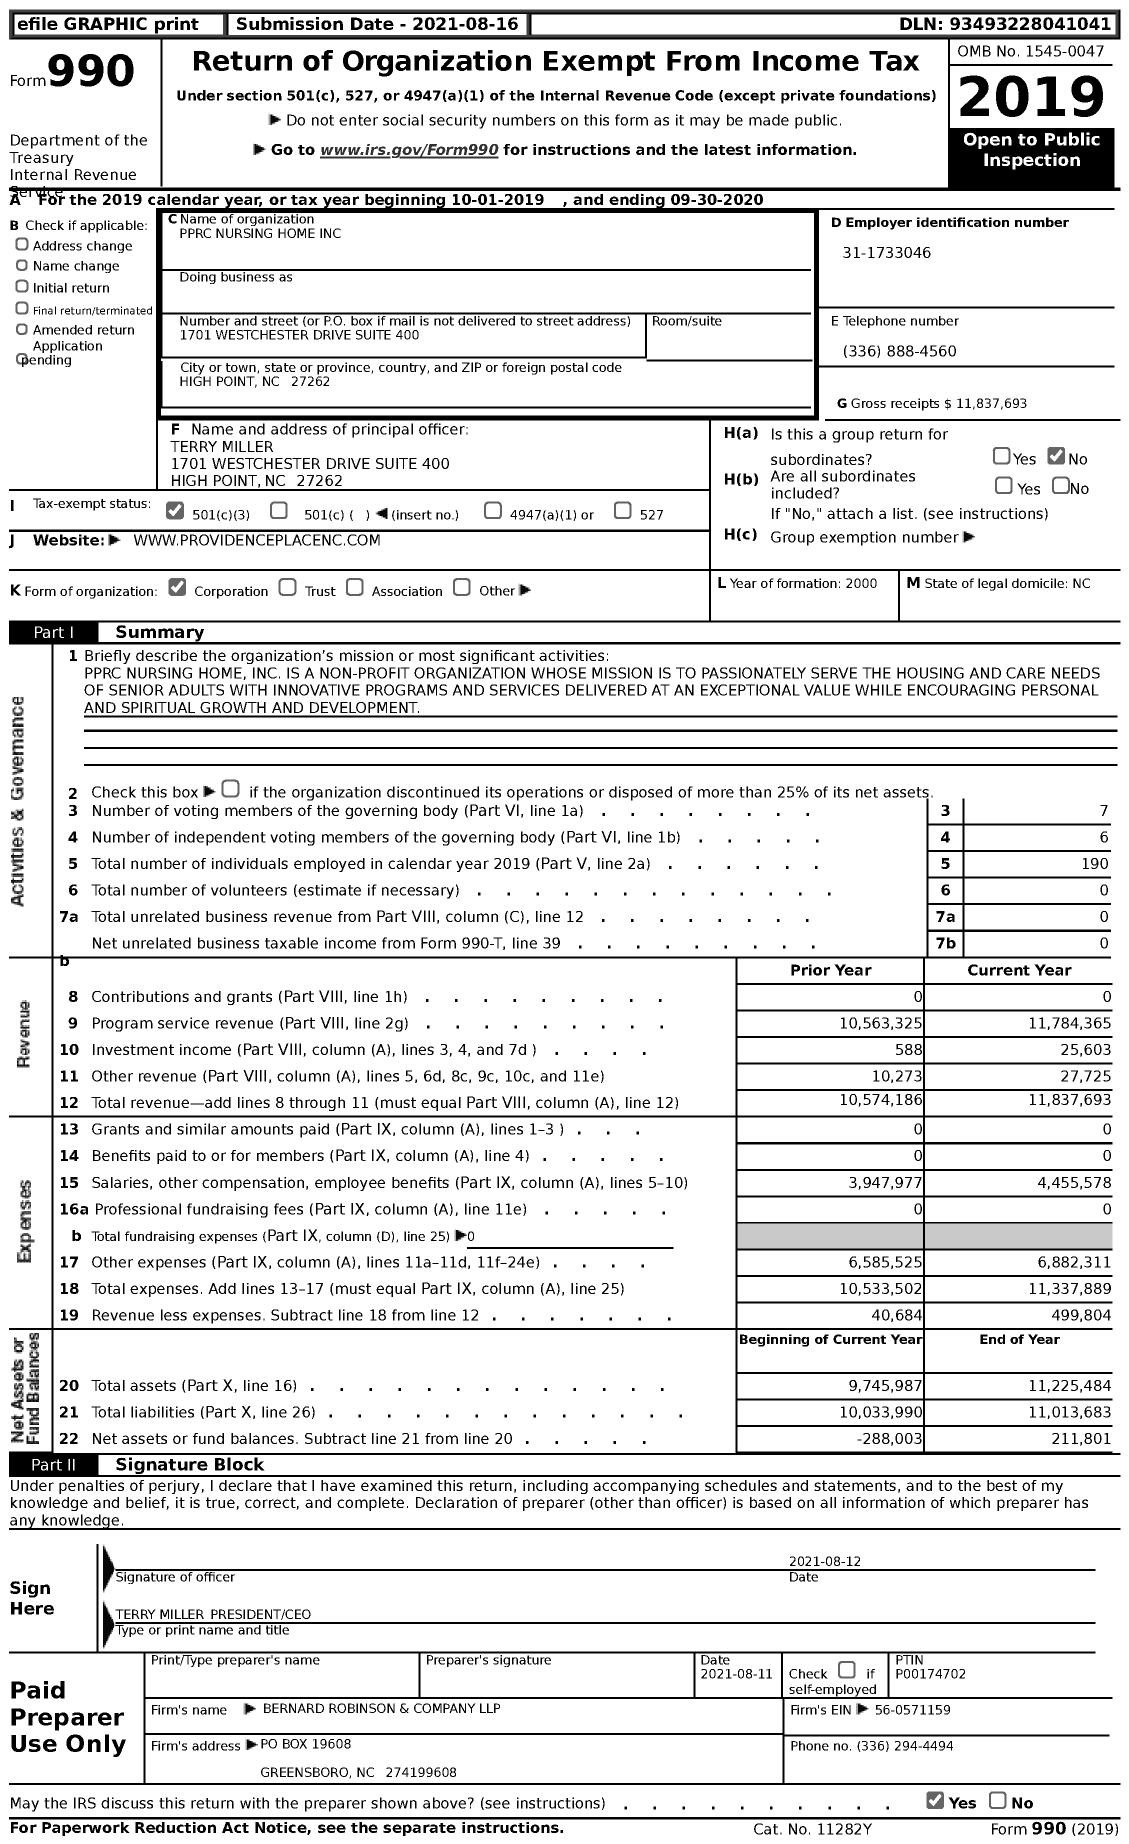 Image of first page of 2019 Form 990 for PPRC Nursing Home